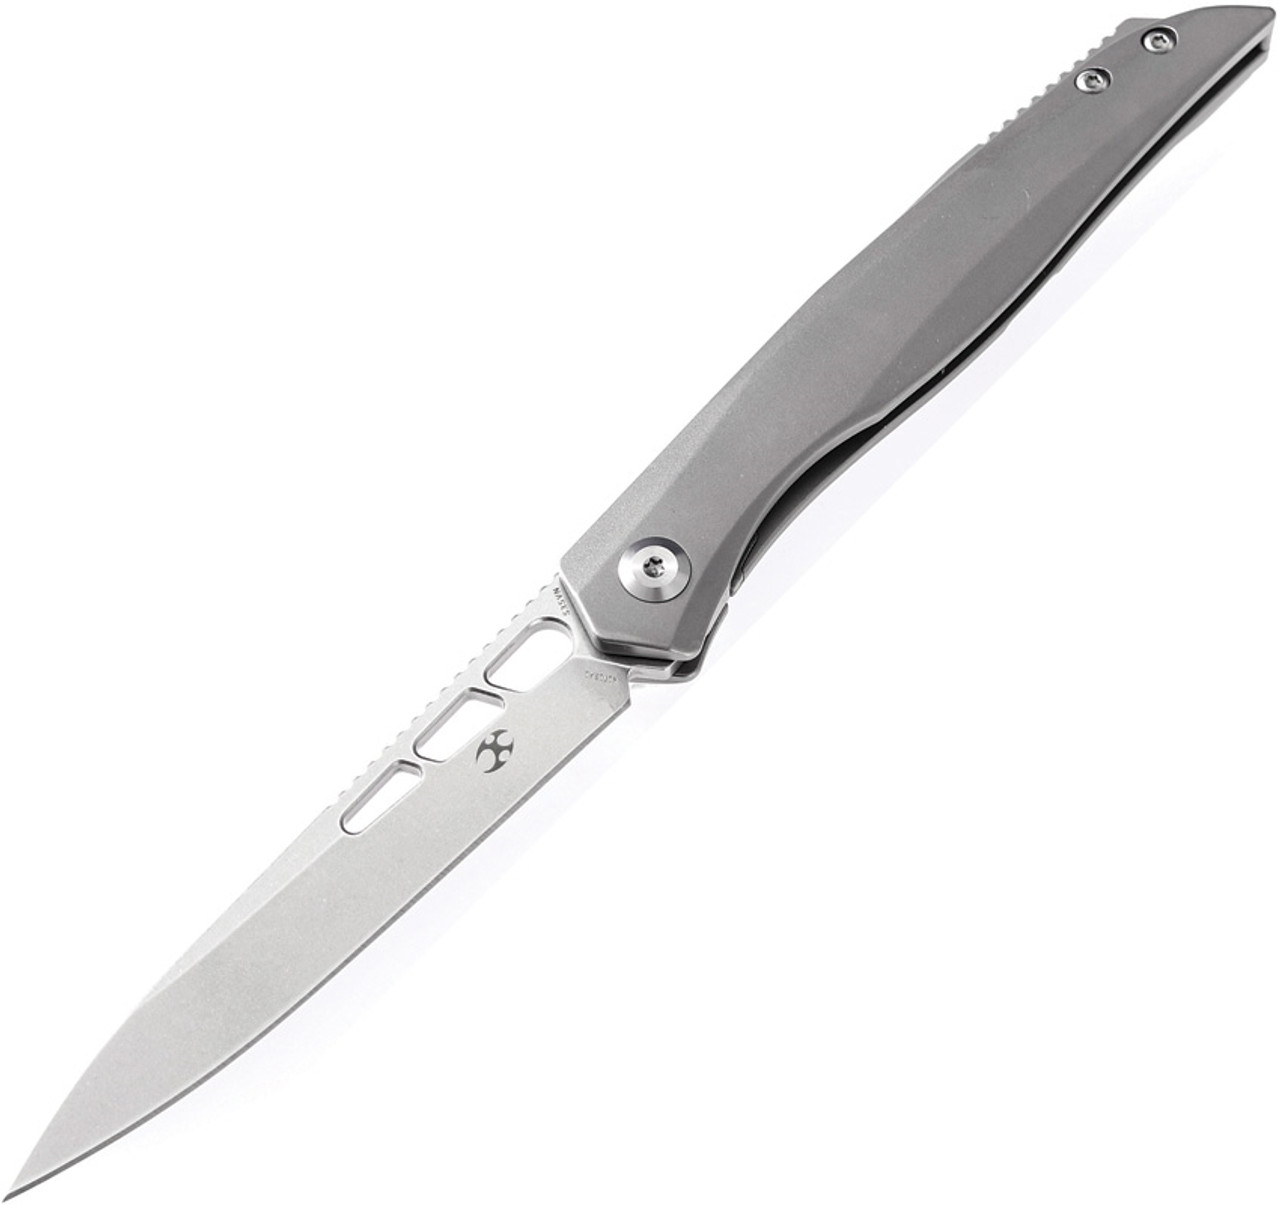 Kansept Knives Lucky Star (K1013A1) 3.5" CPM-S35VN Stonewashed Spear Point Plain Blade, Gray Titanium Handle